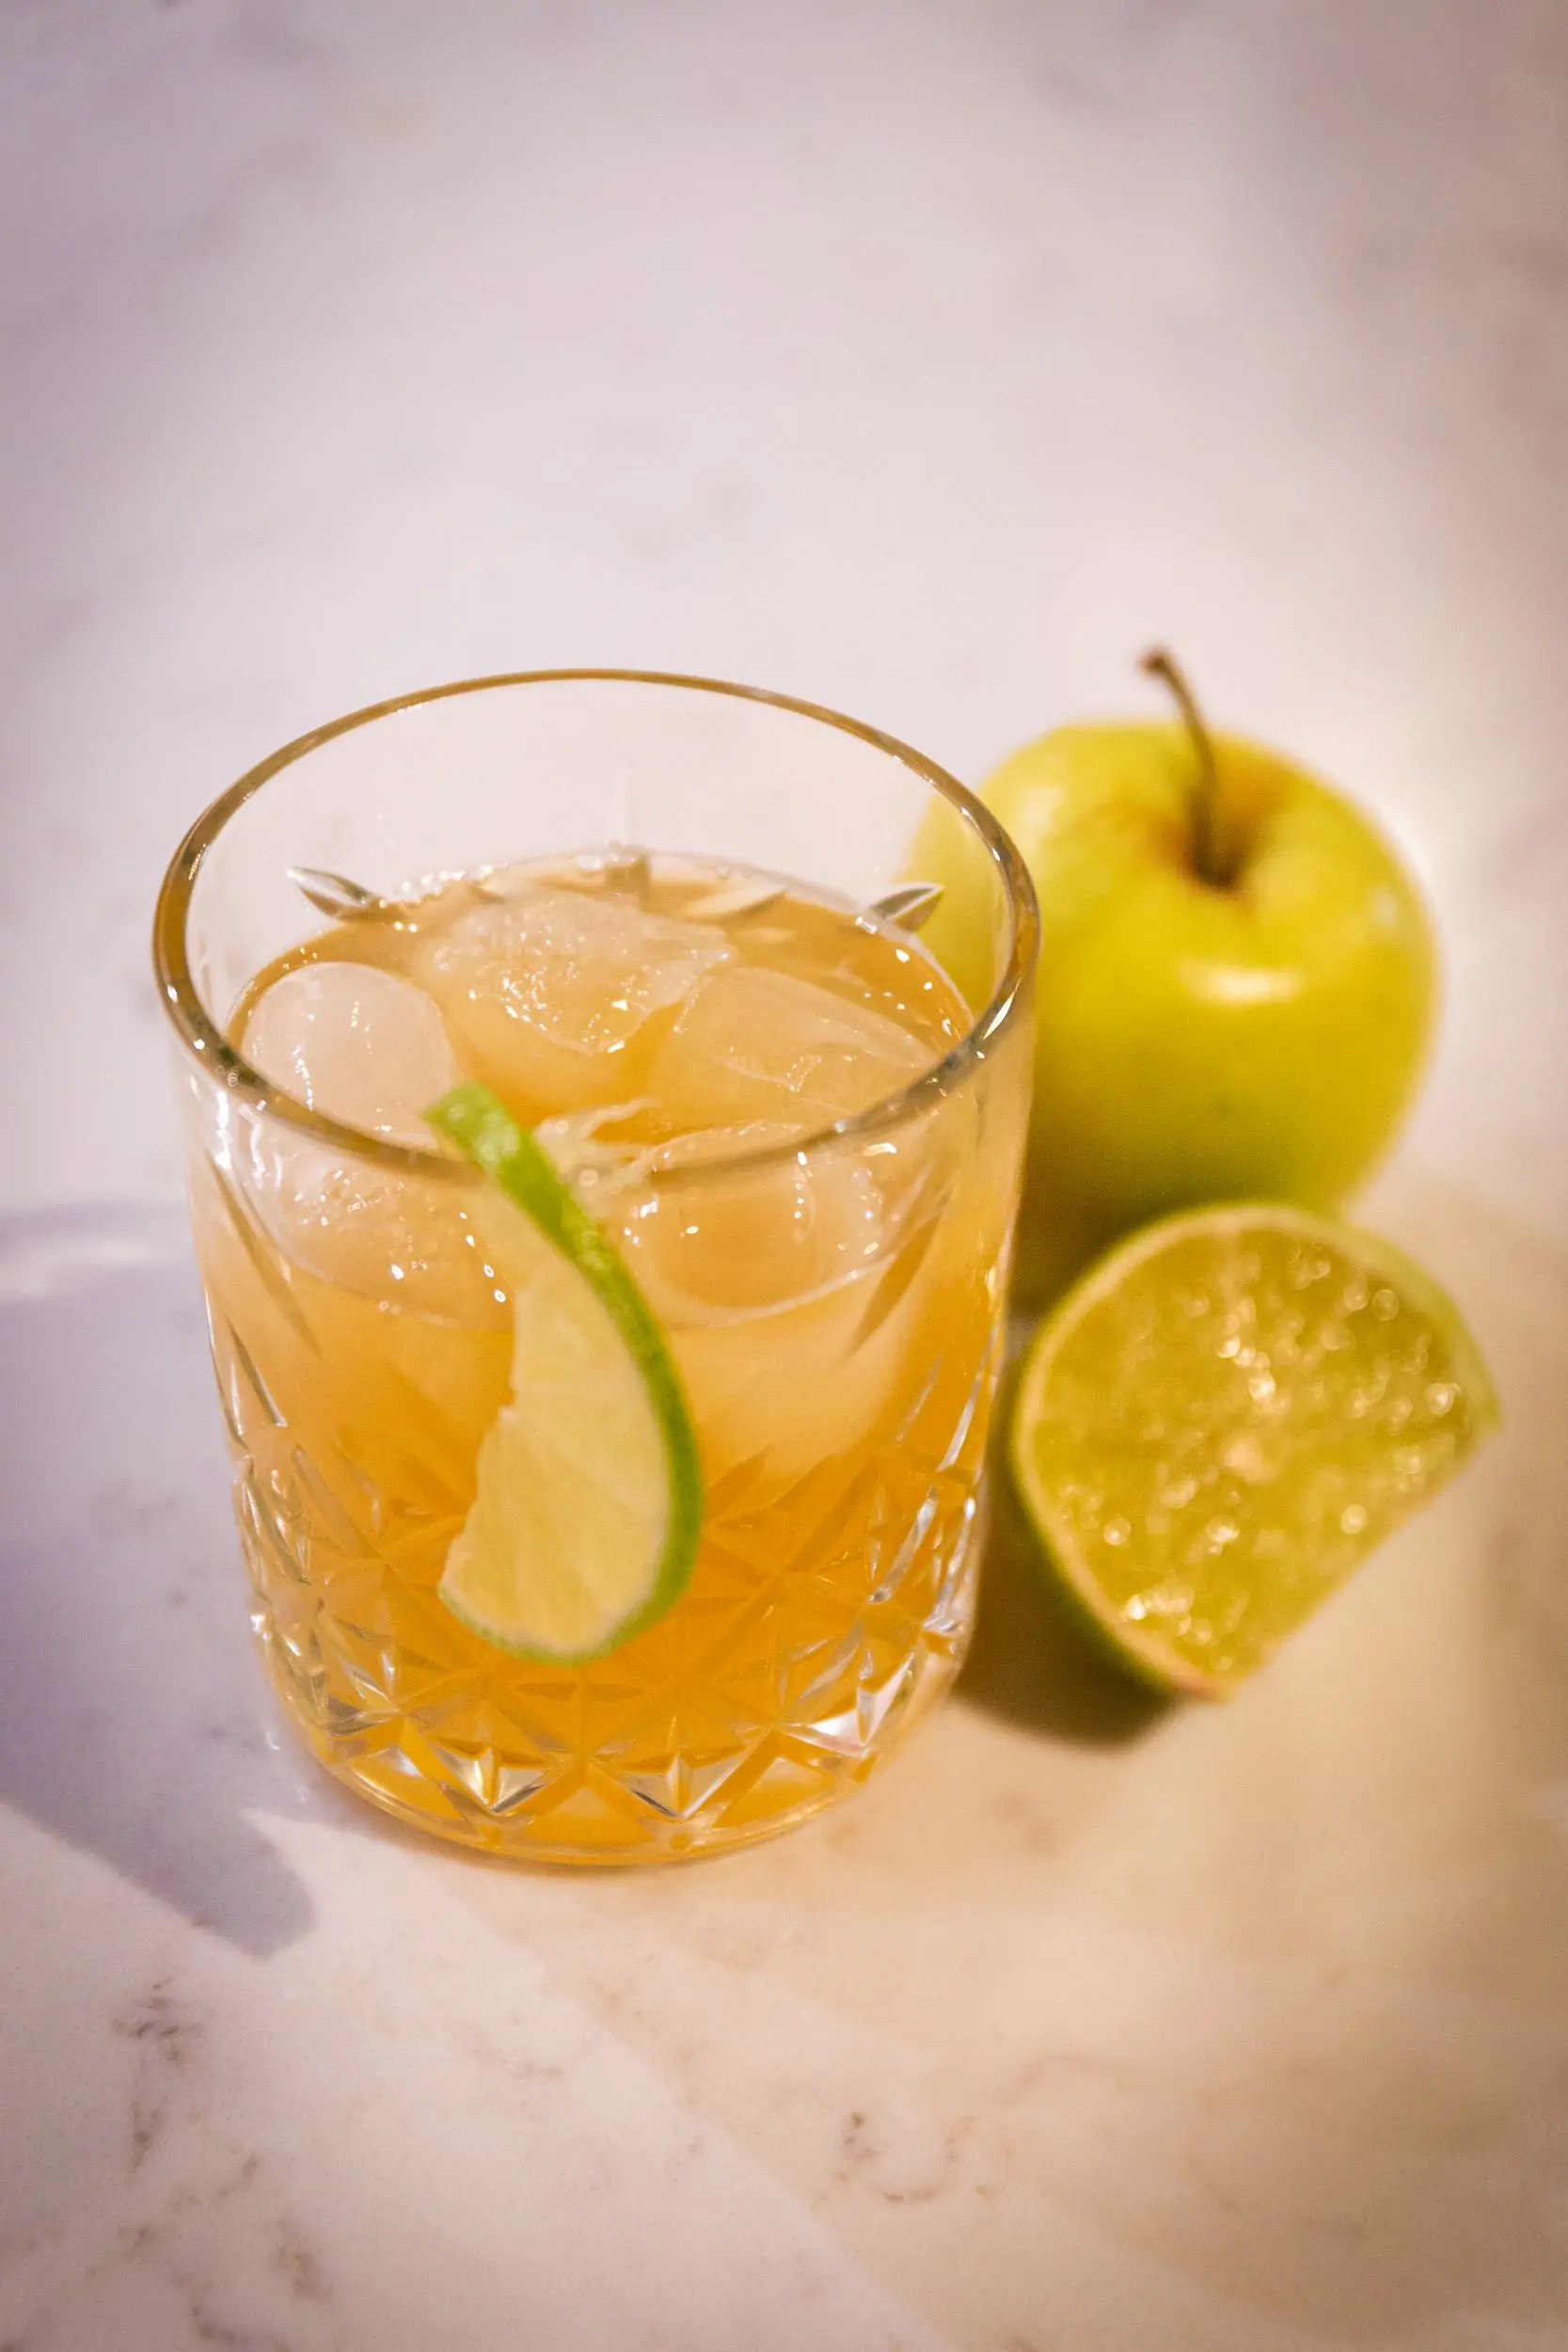 Spiced apple and ginger rum cocktail